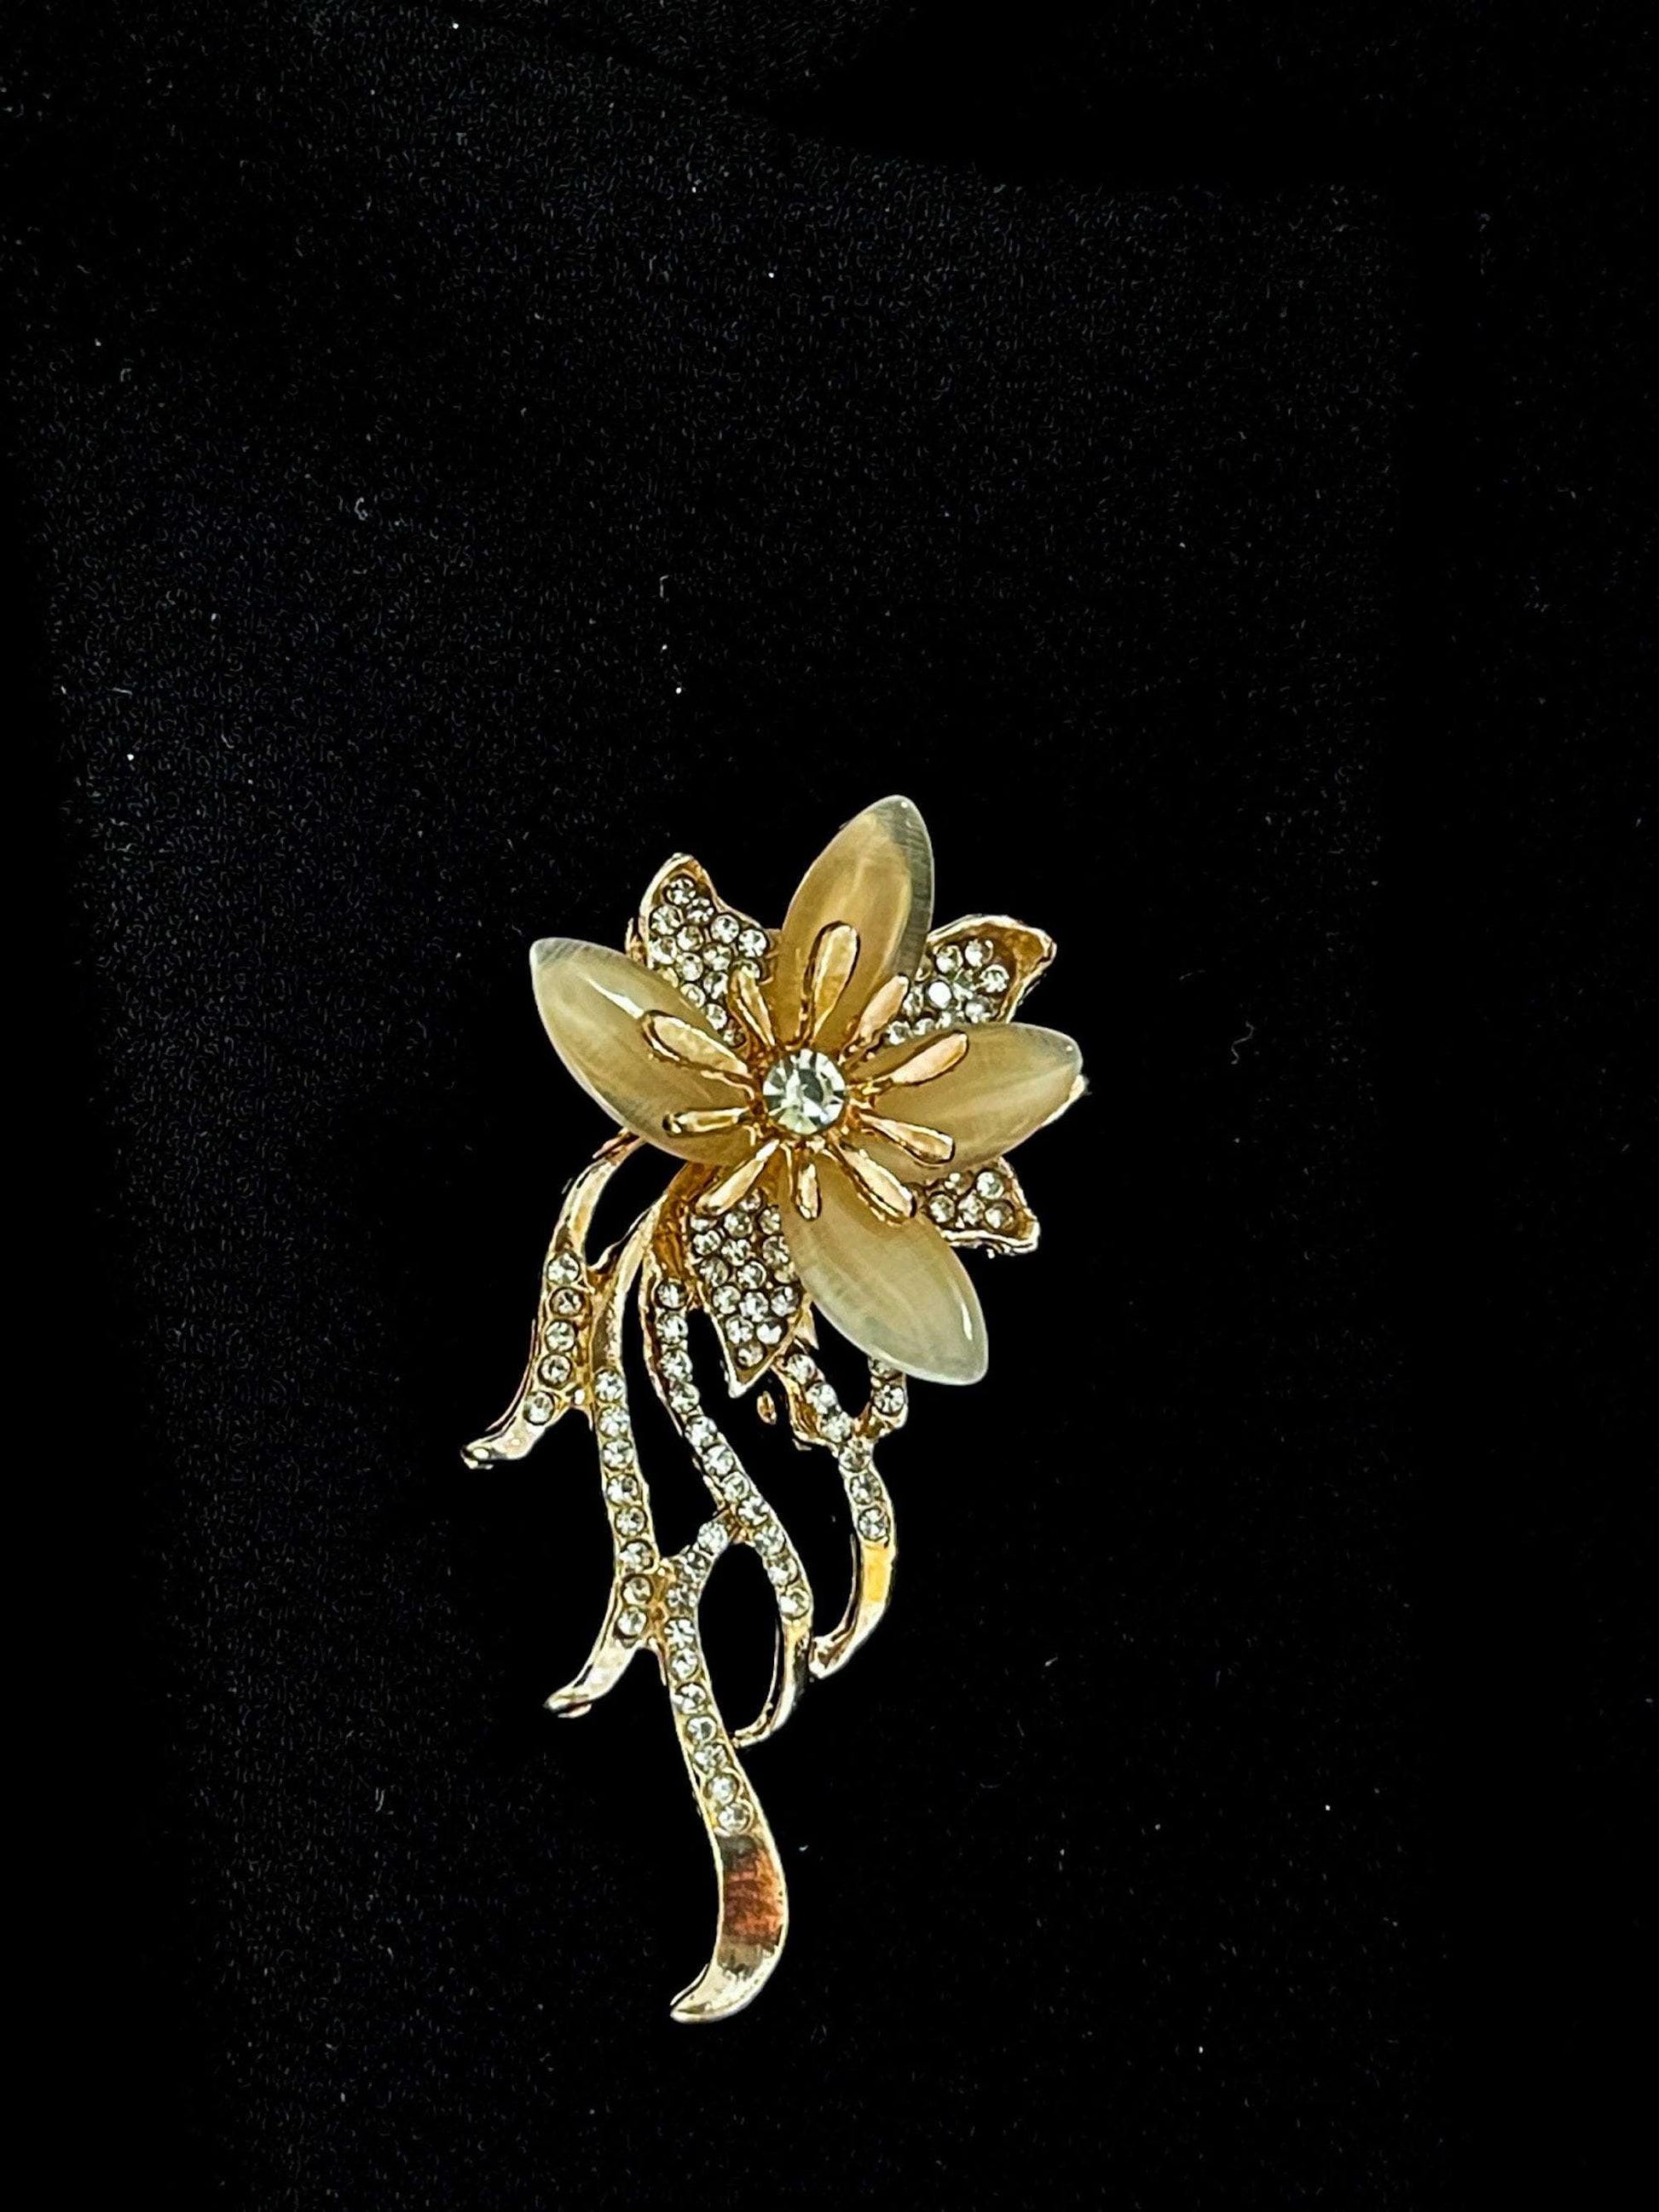 Gold Opal Flower Brooch with Crystals, Fashion Brooch, Elegant Jewellery, Crystal Flower Pin, Brooches for Women,